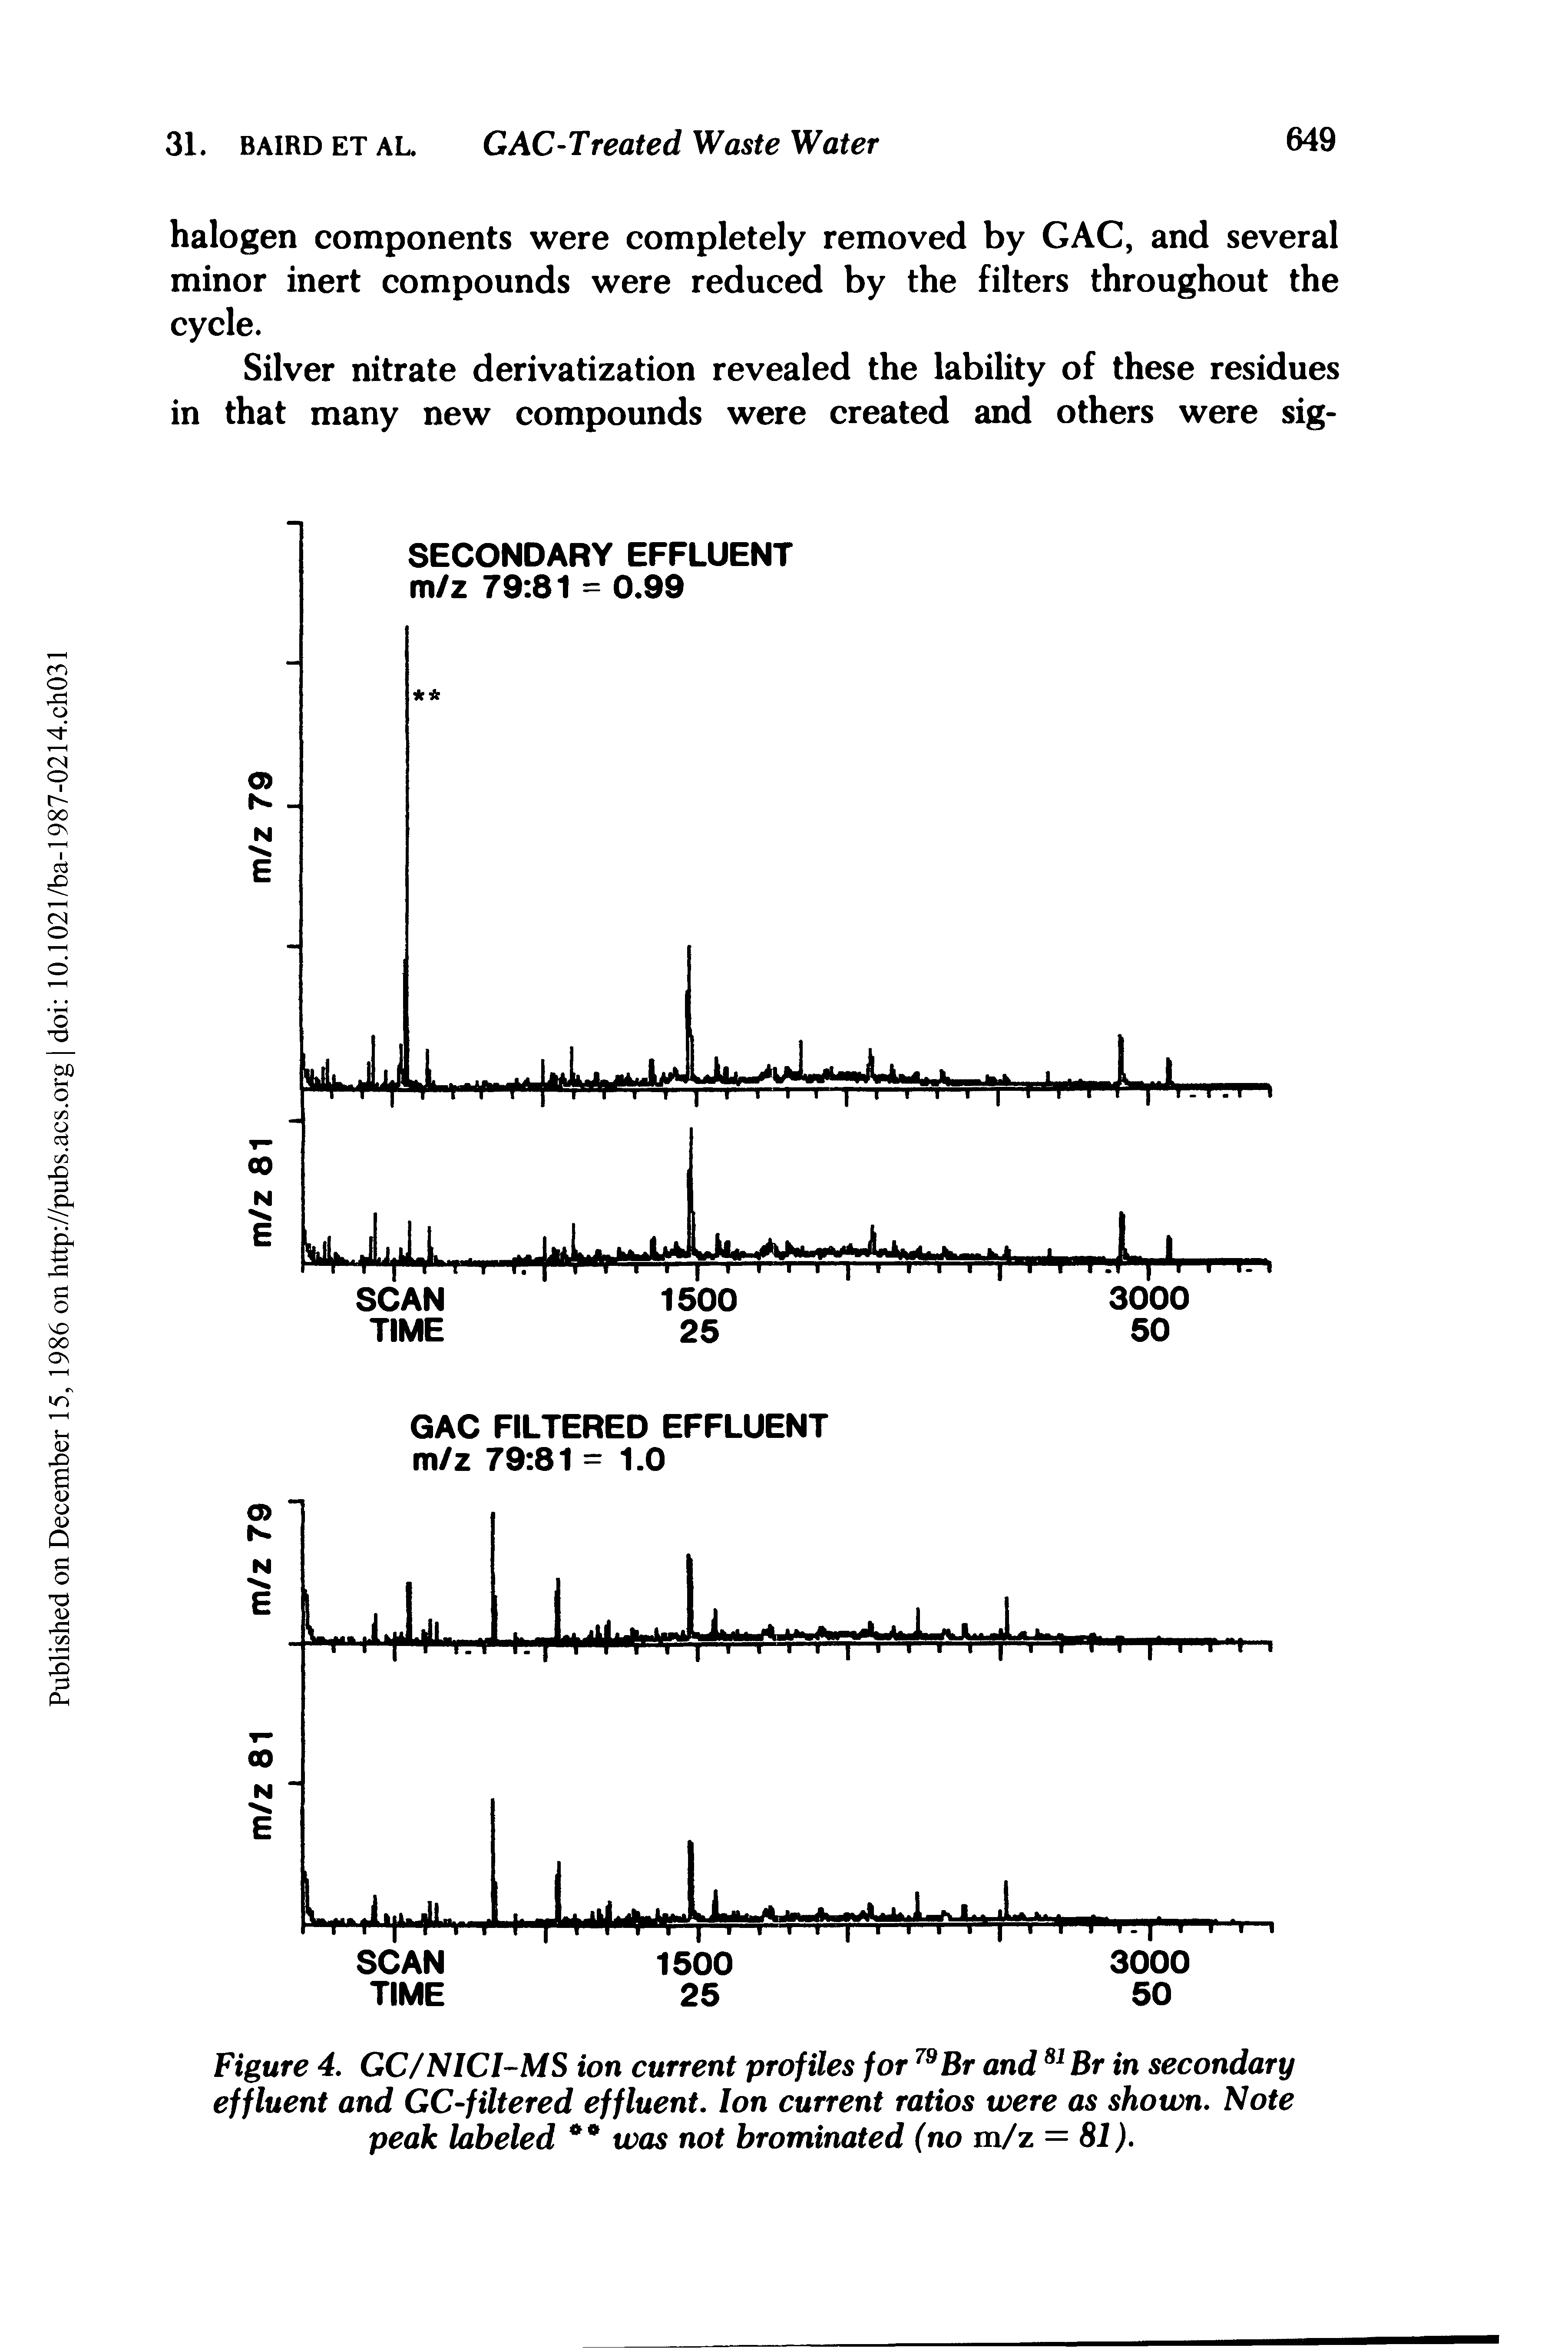 Figure 4. GC/NICI-MS ion current profiles for 79Br and 81 Br in secondary effluent and GC-filtered effluent. Ion current ratios were as shown. Note peak labeled was not brominated (no m/z = 81).